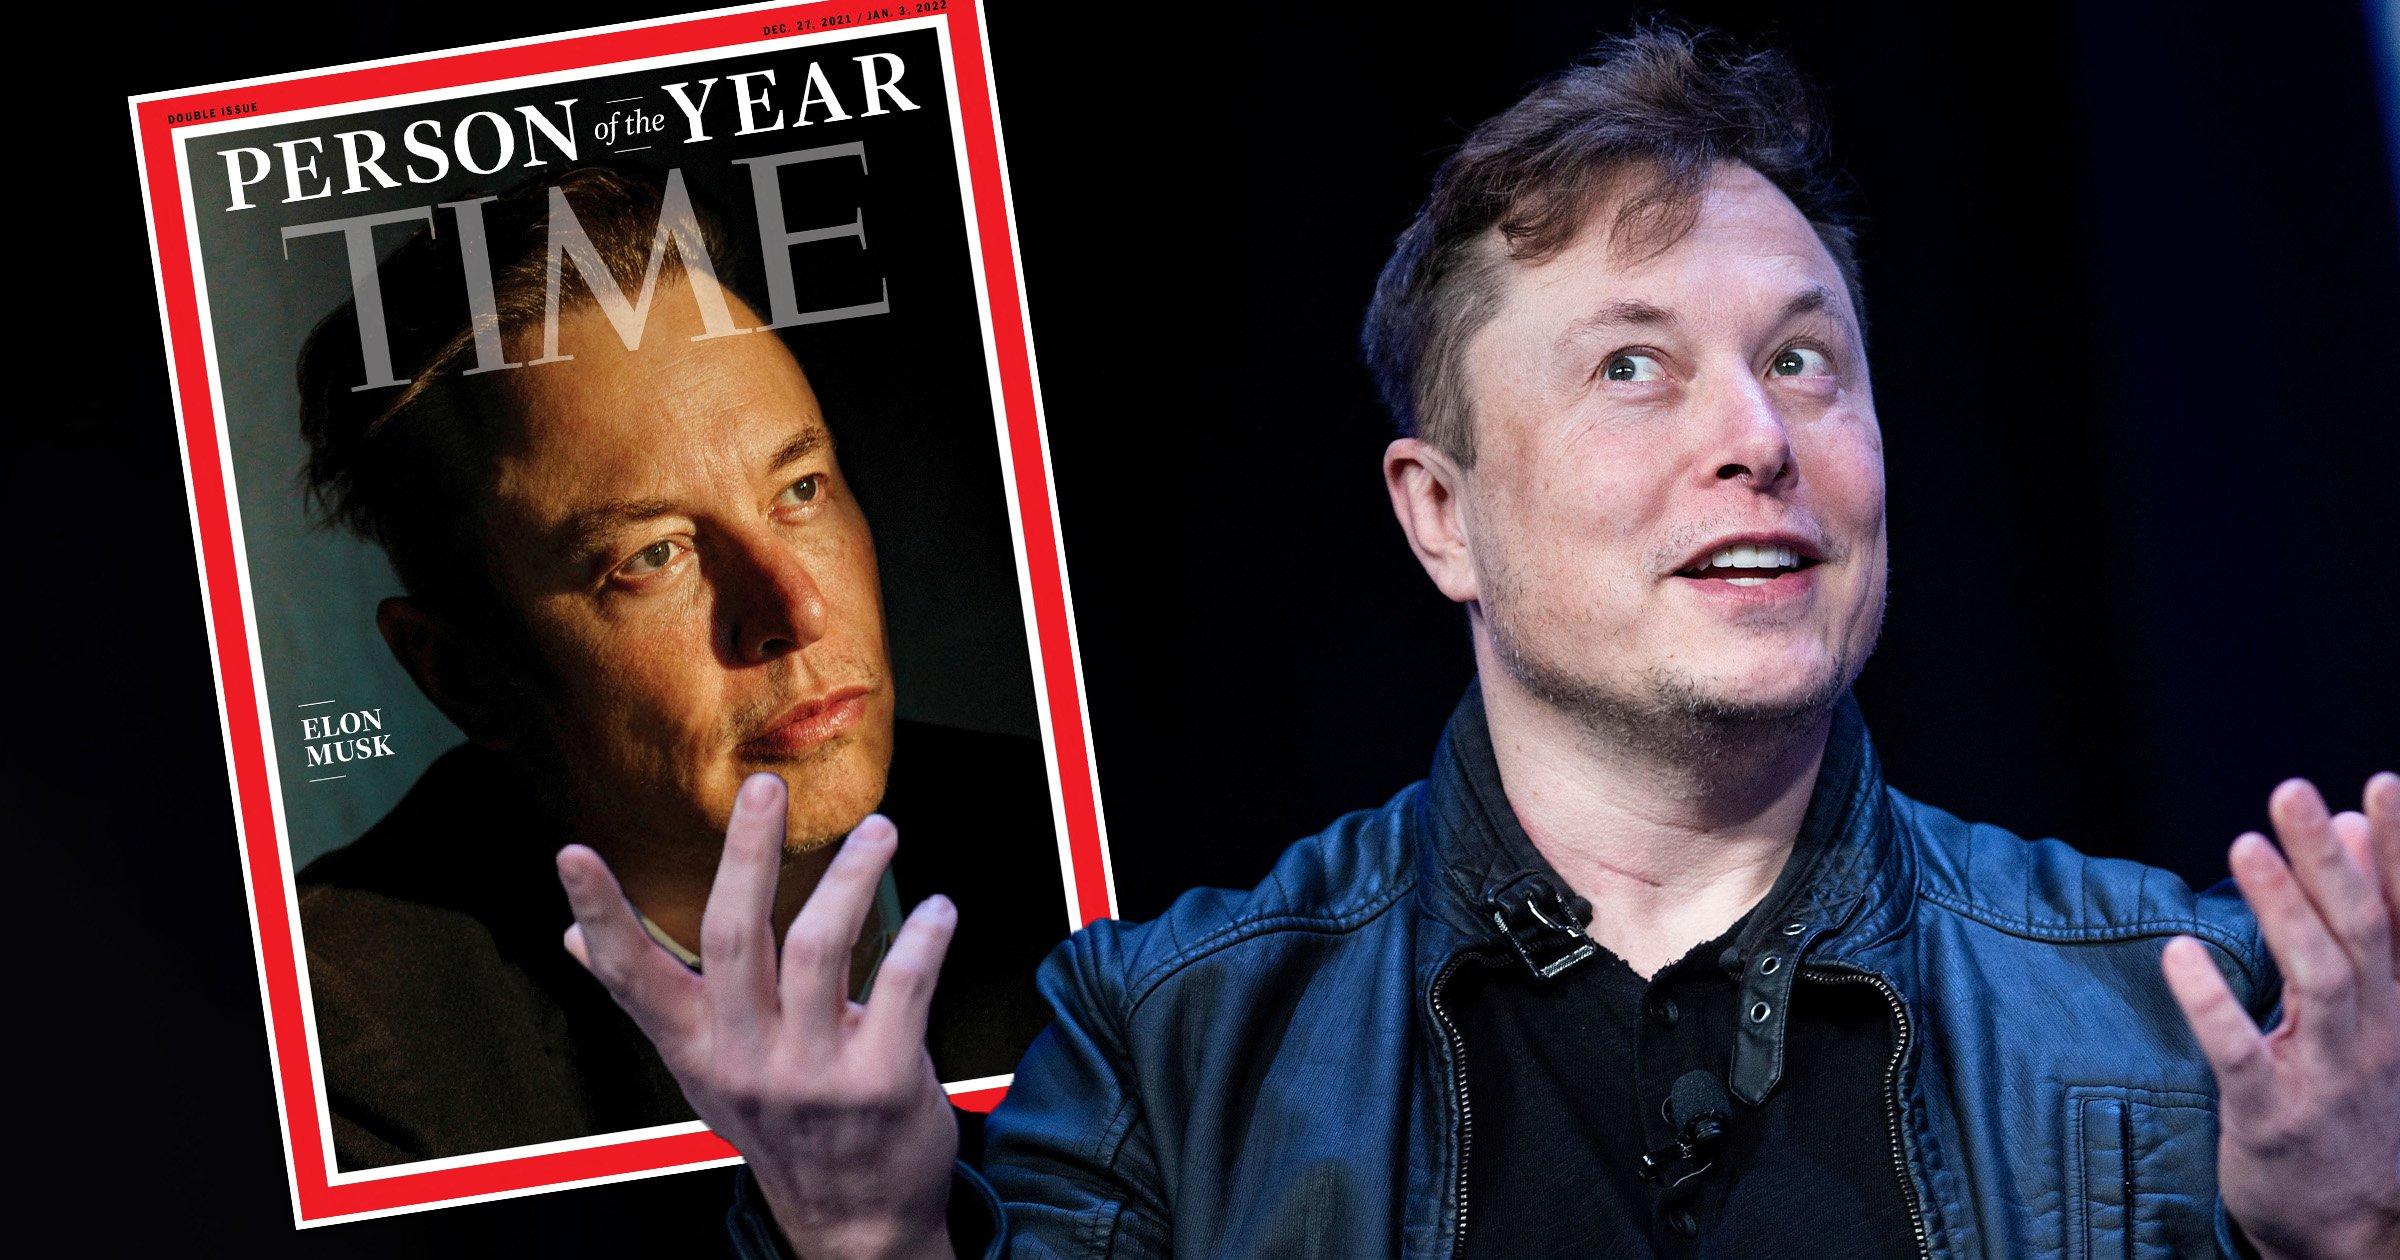 Elon Musk : TIME Magazine's 'Person of the Year' for 2021_40.1